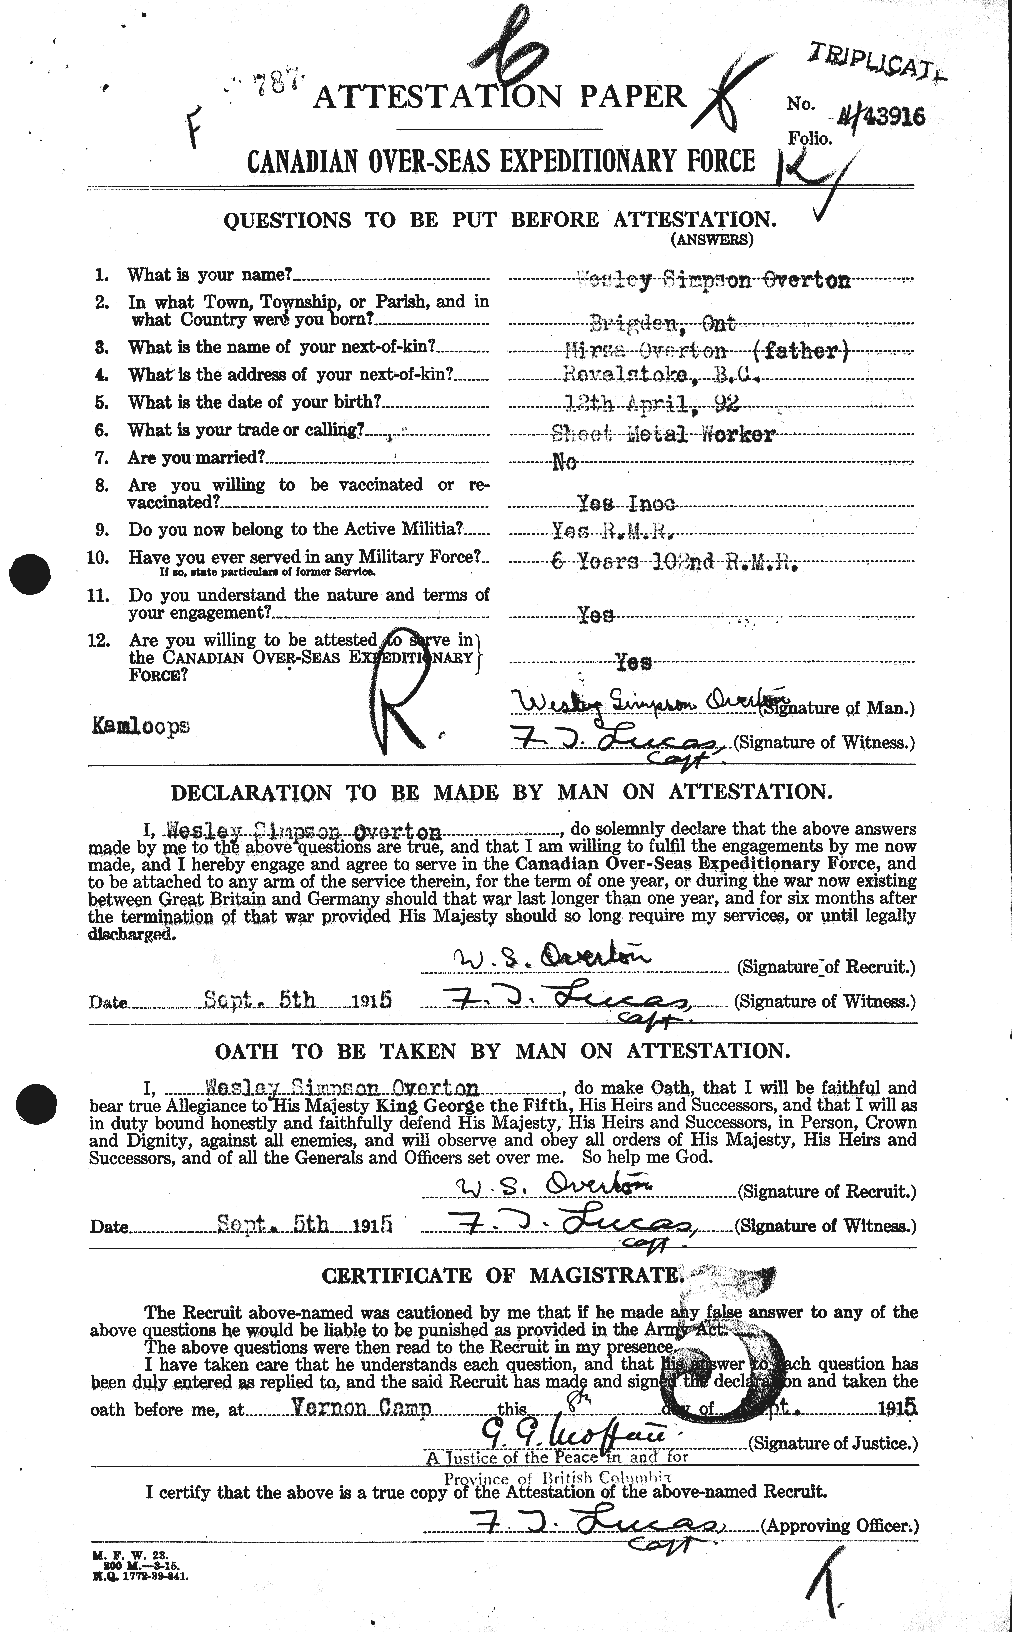 Personnel Records of the First World War - CEF 561158a